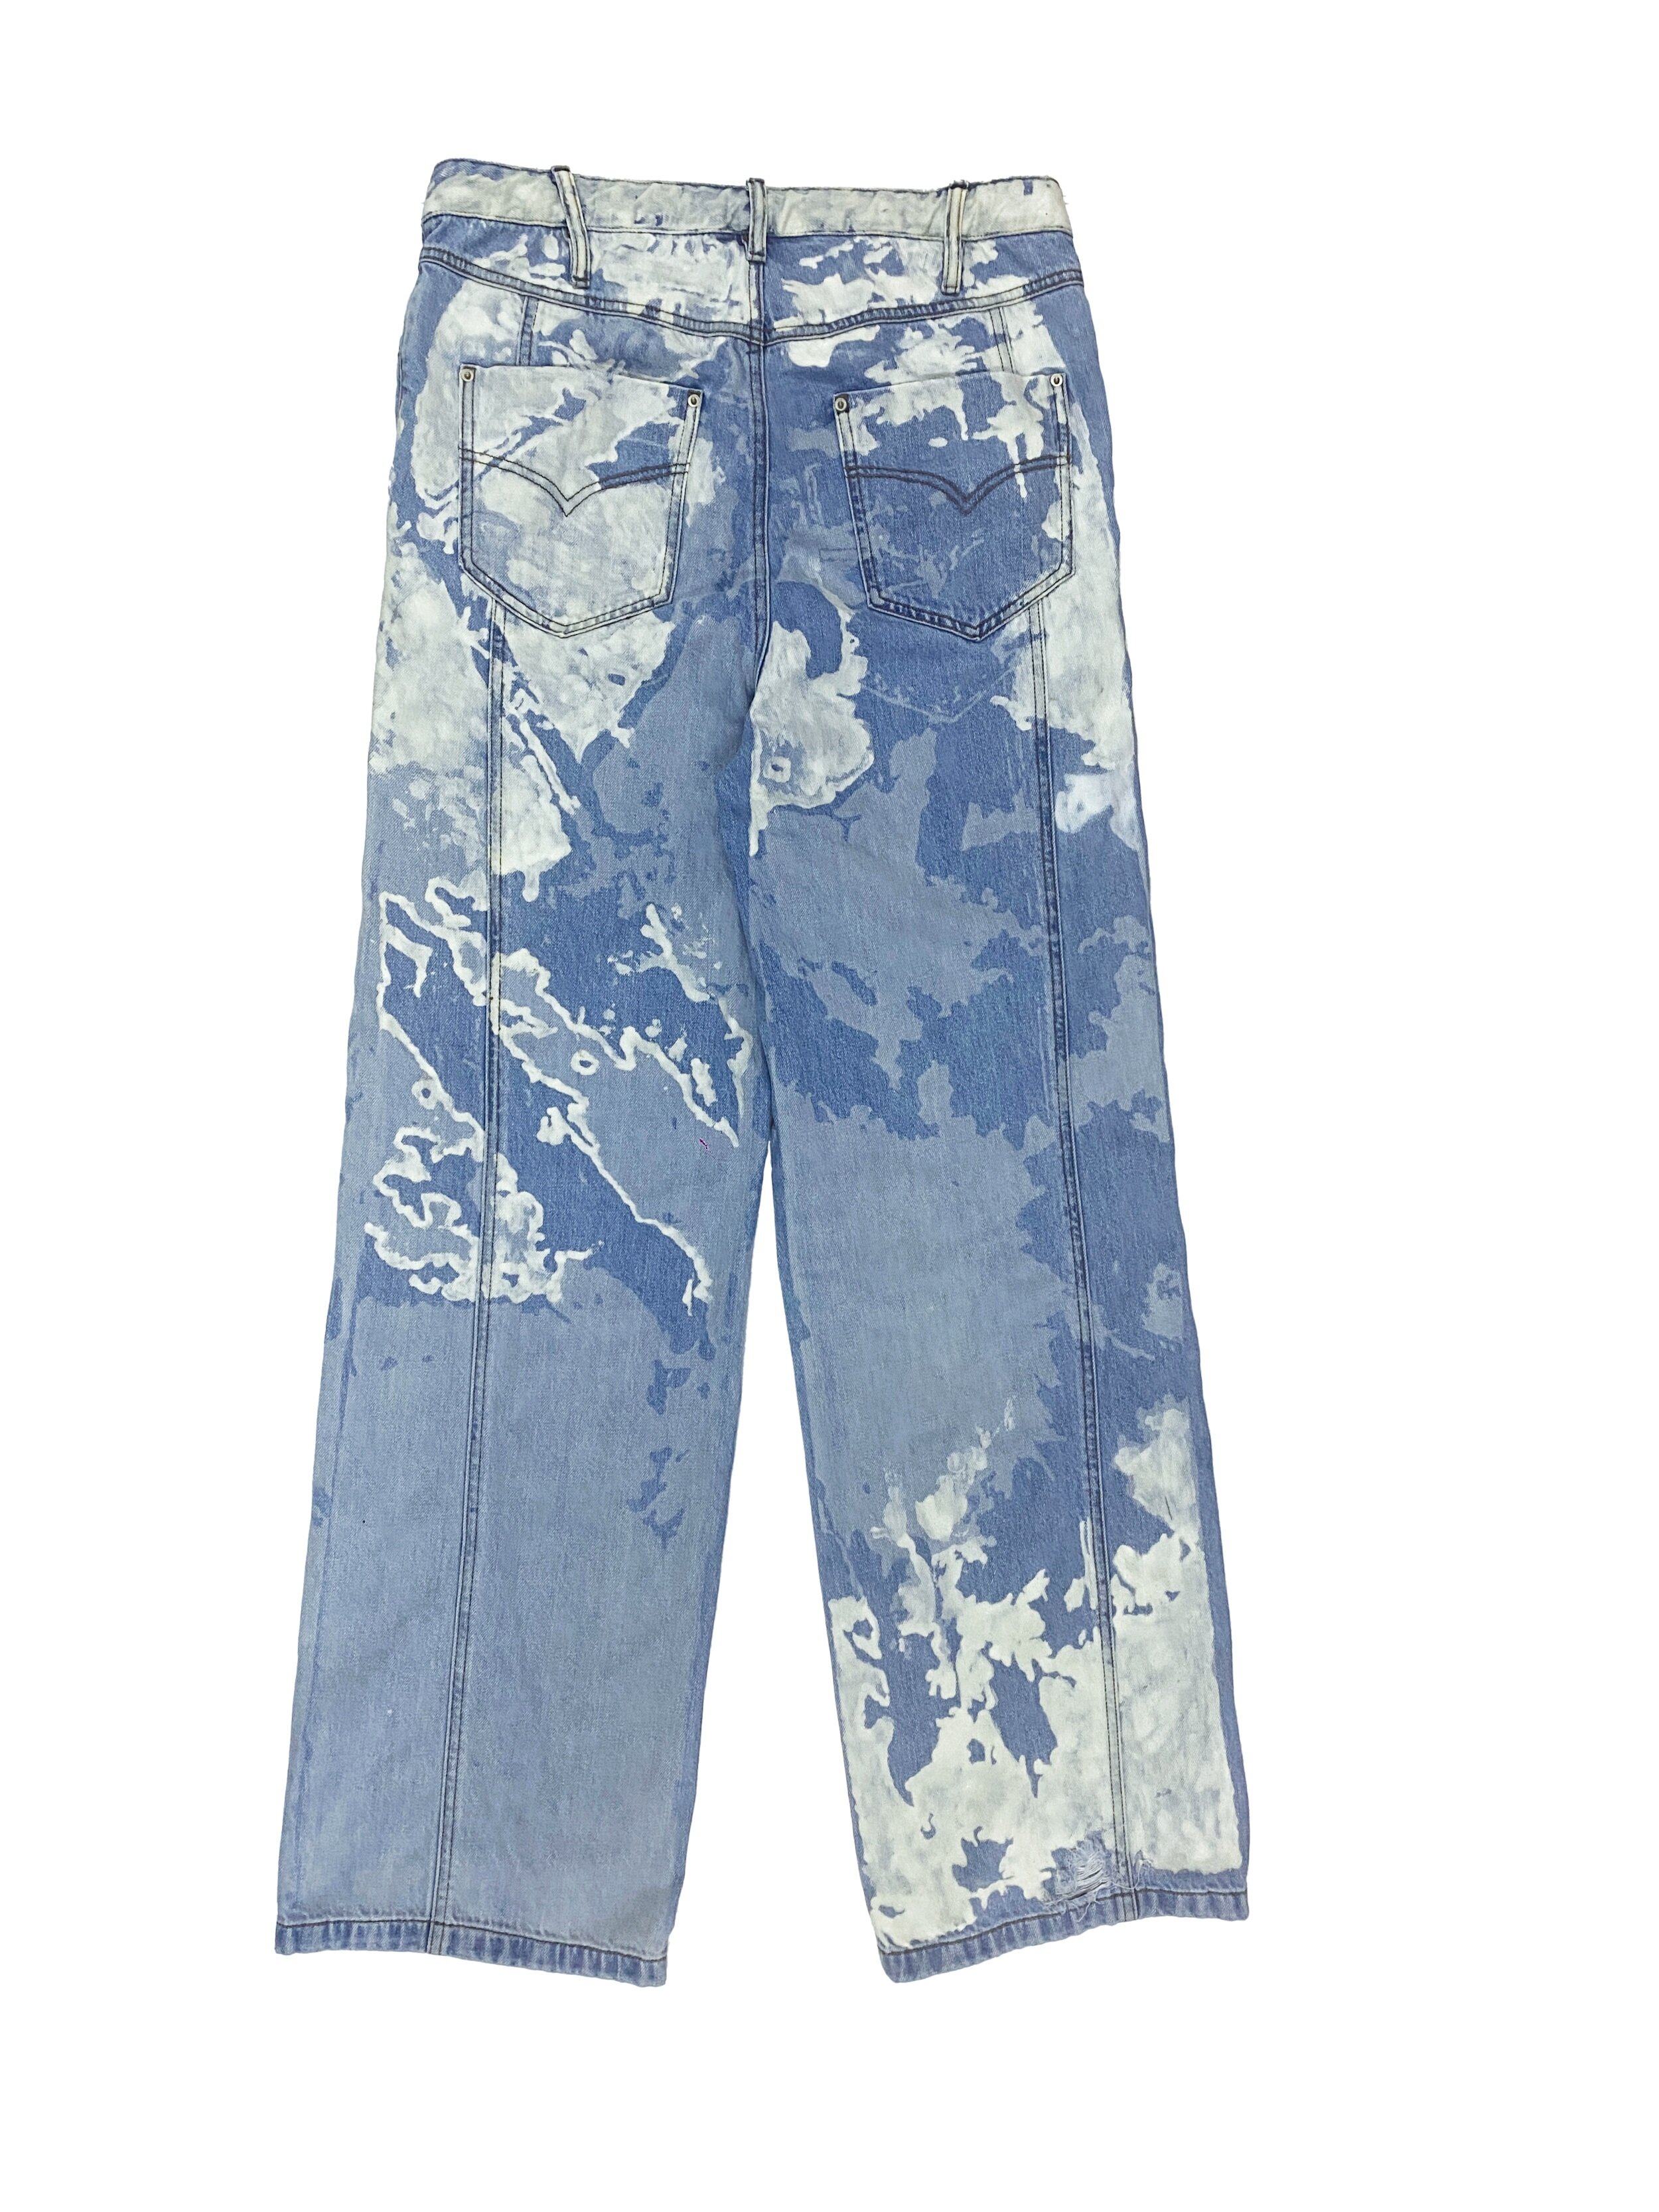 Laser-bleached, partially oxygen bleached Jeans — ALA TIANAN